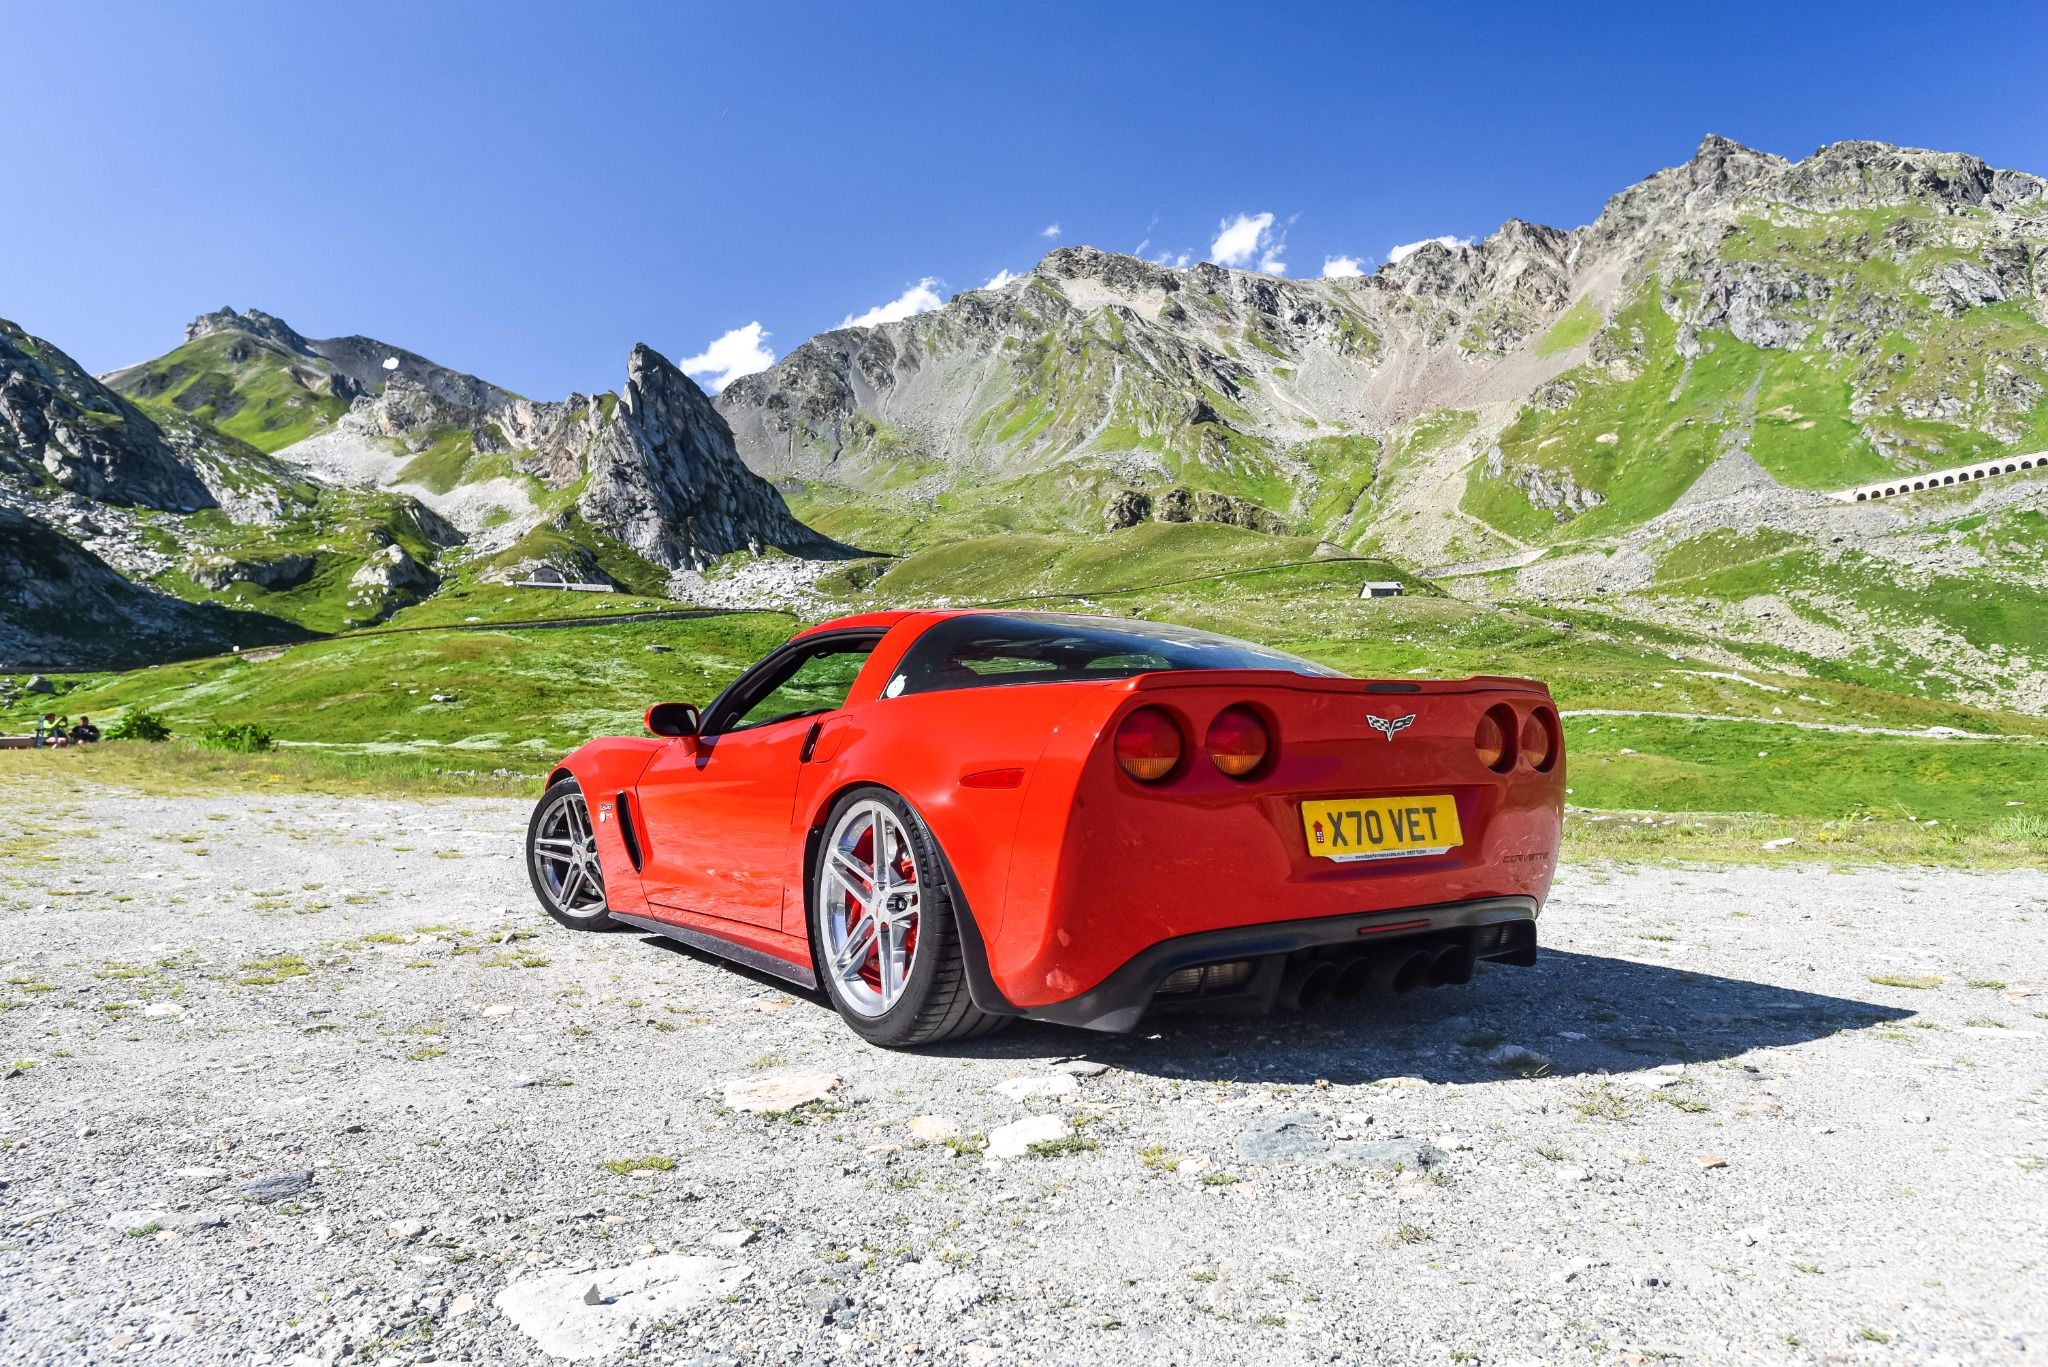 Rear of a red sports car in front of mountains